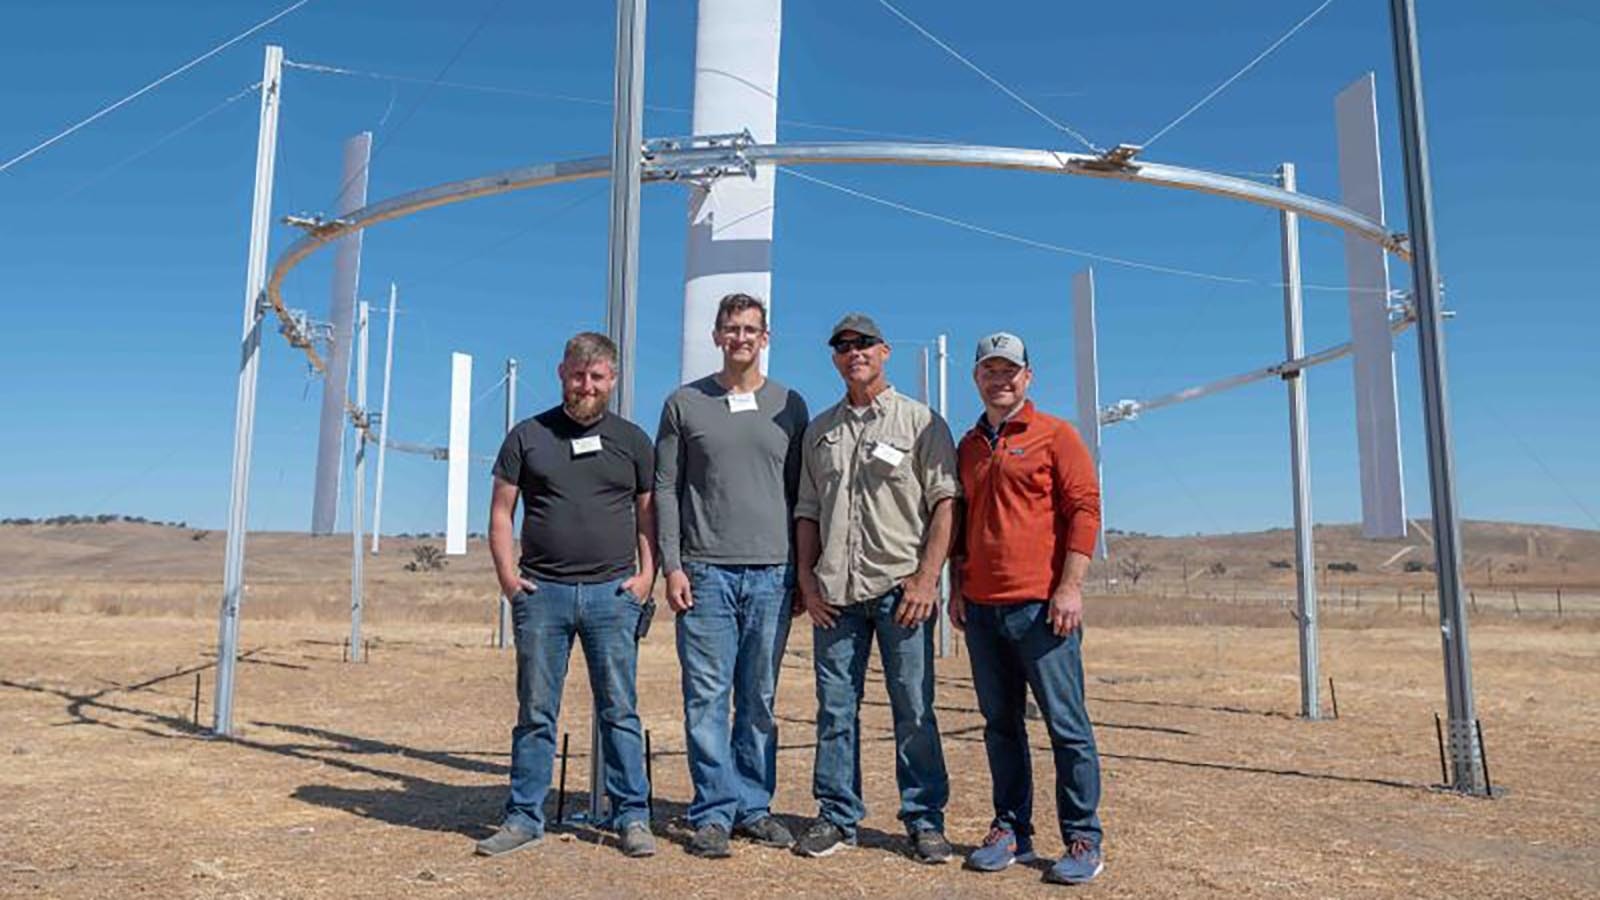 A team of workers helped build a makeshift version of its approach to wind energy in Paso Robles, California, for testing out with the military for possible applications on the battlefield.